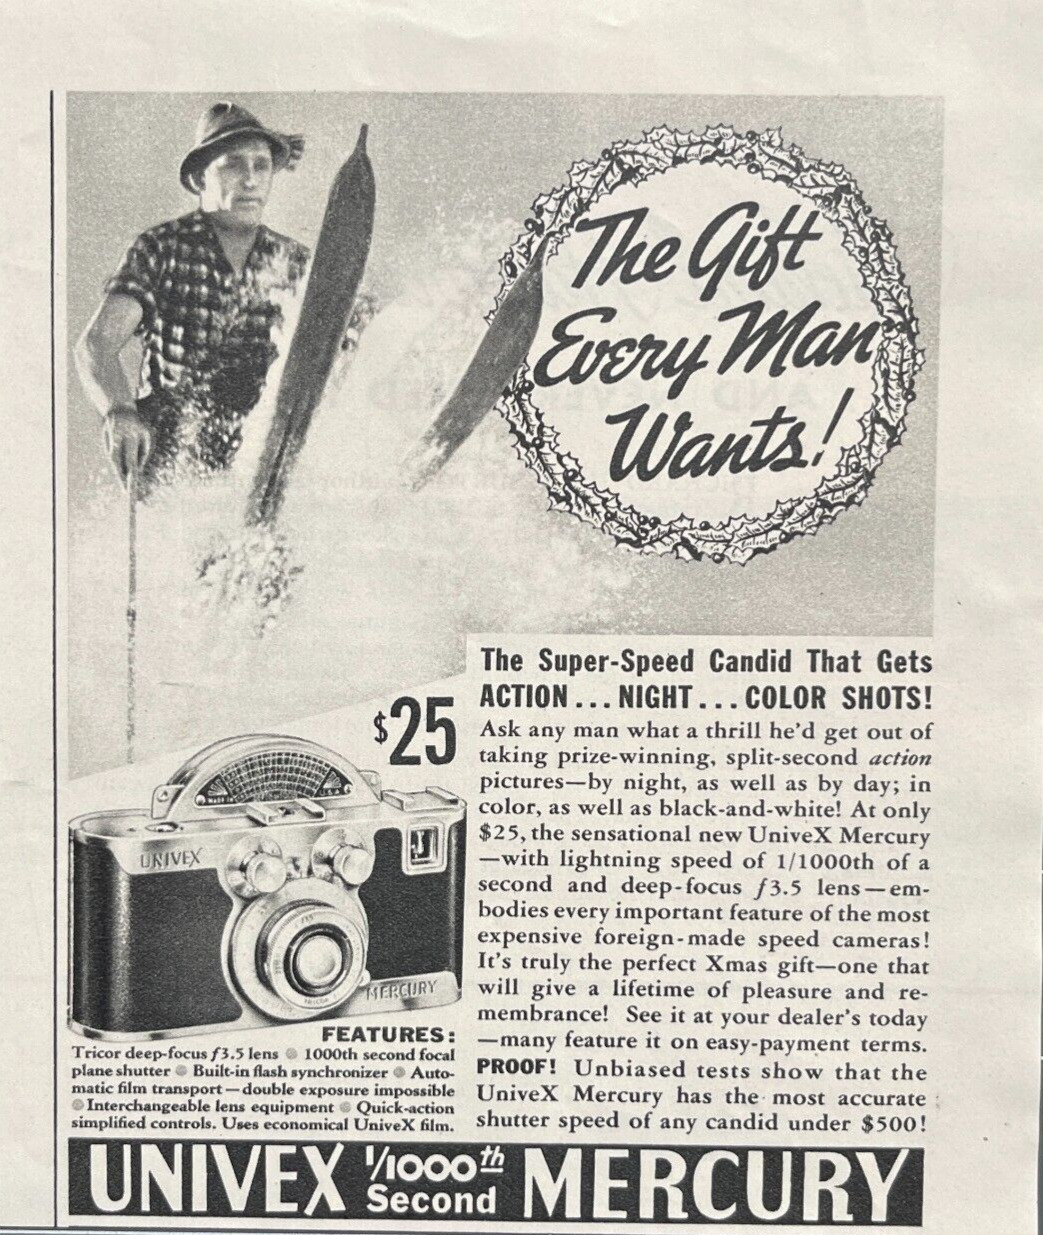 1939 Univex Camera Vintage Print Ad Super Speed Candid The Gift Every Man Wants